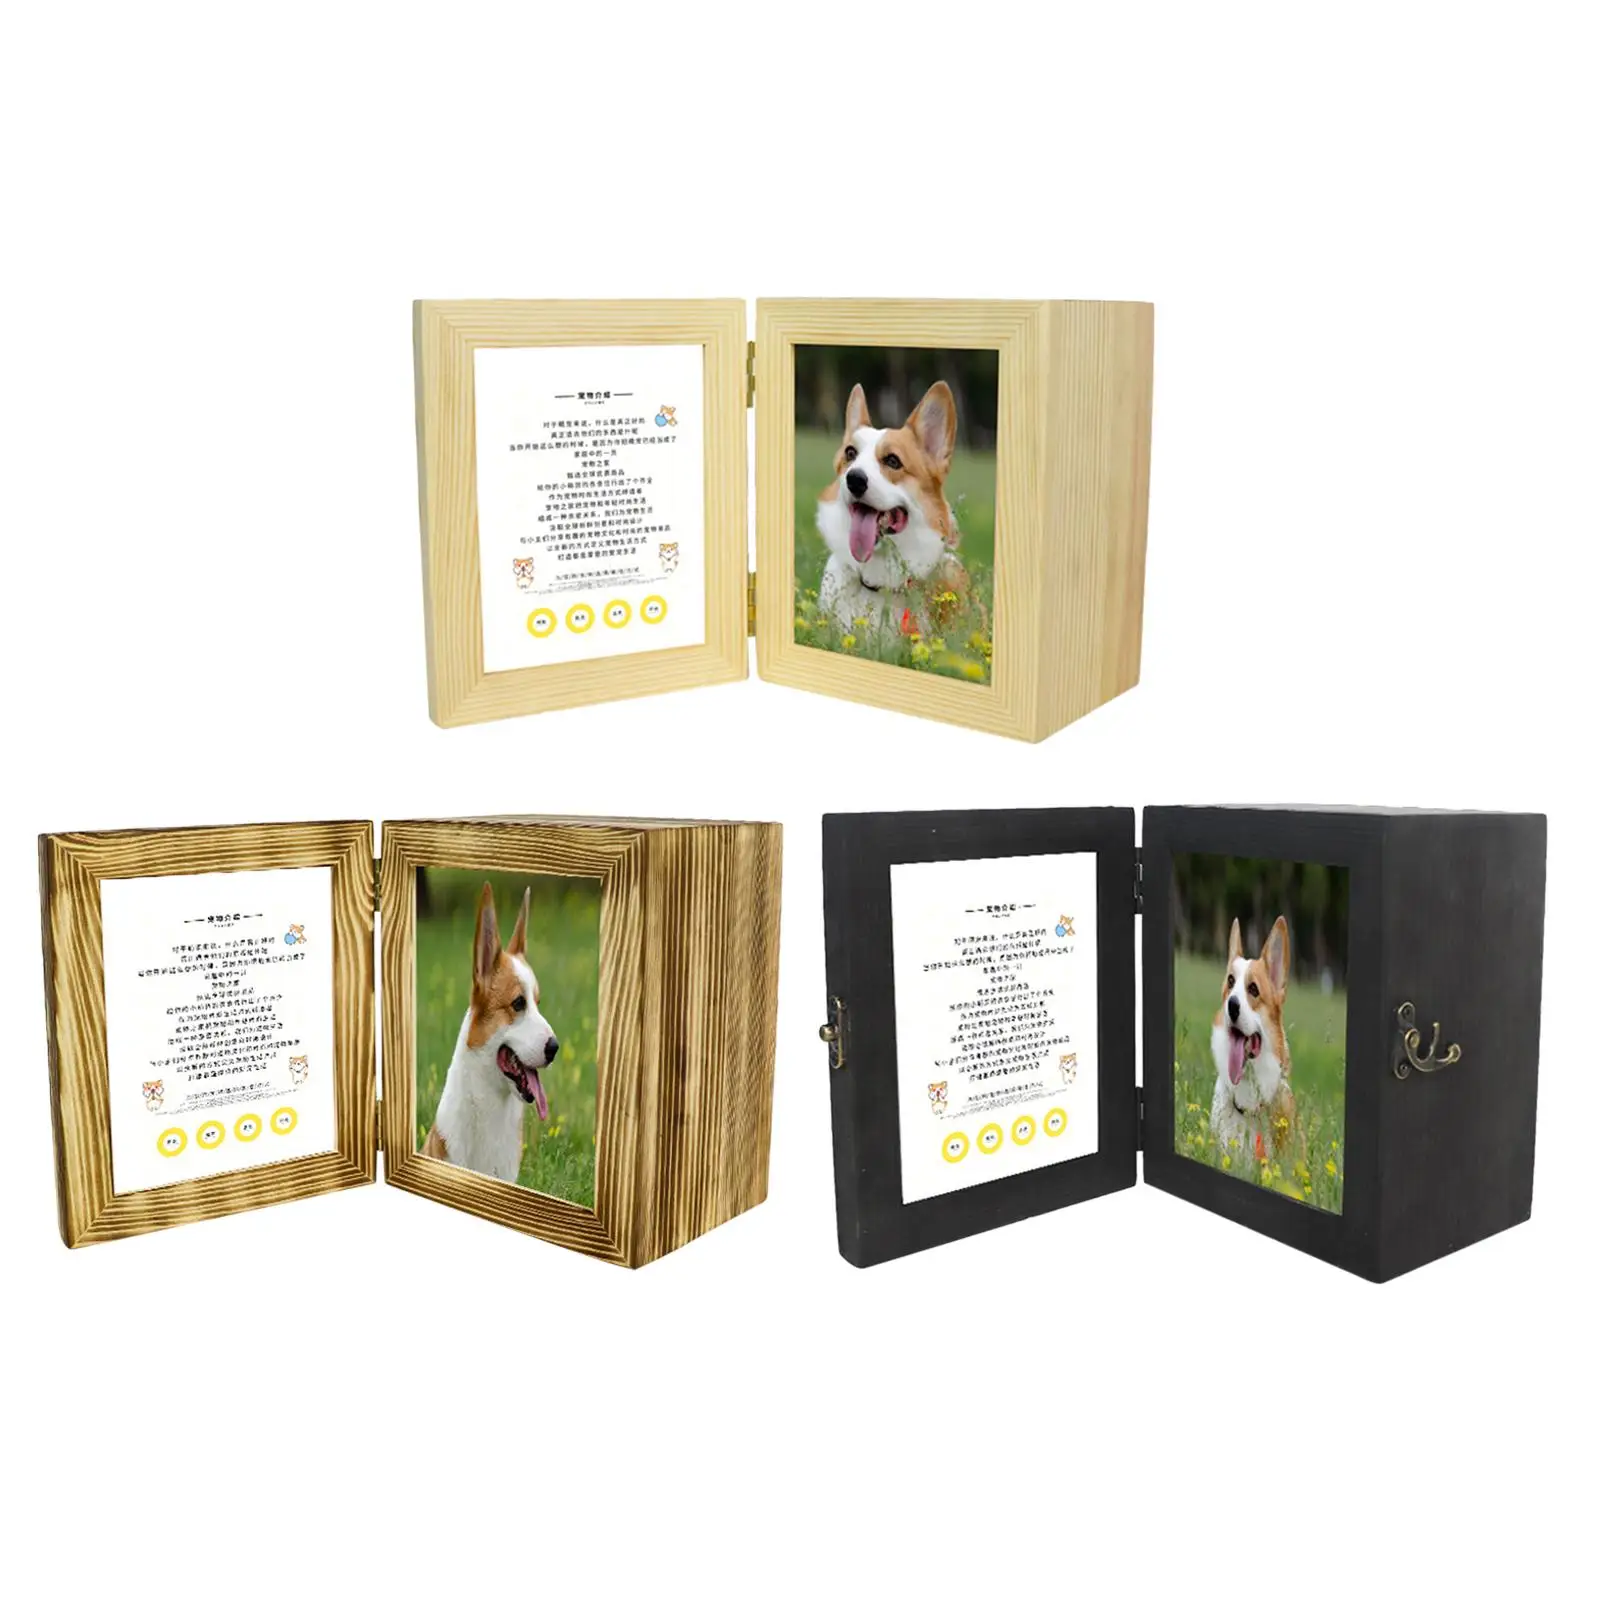 Wood Pet Cremation Urn for Dogs Cats Memorial Keepsake Souvenir Gifts